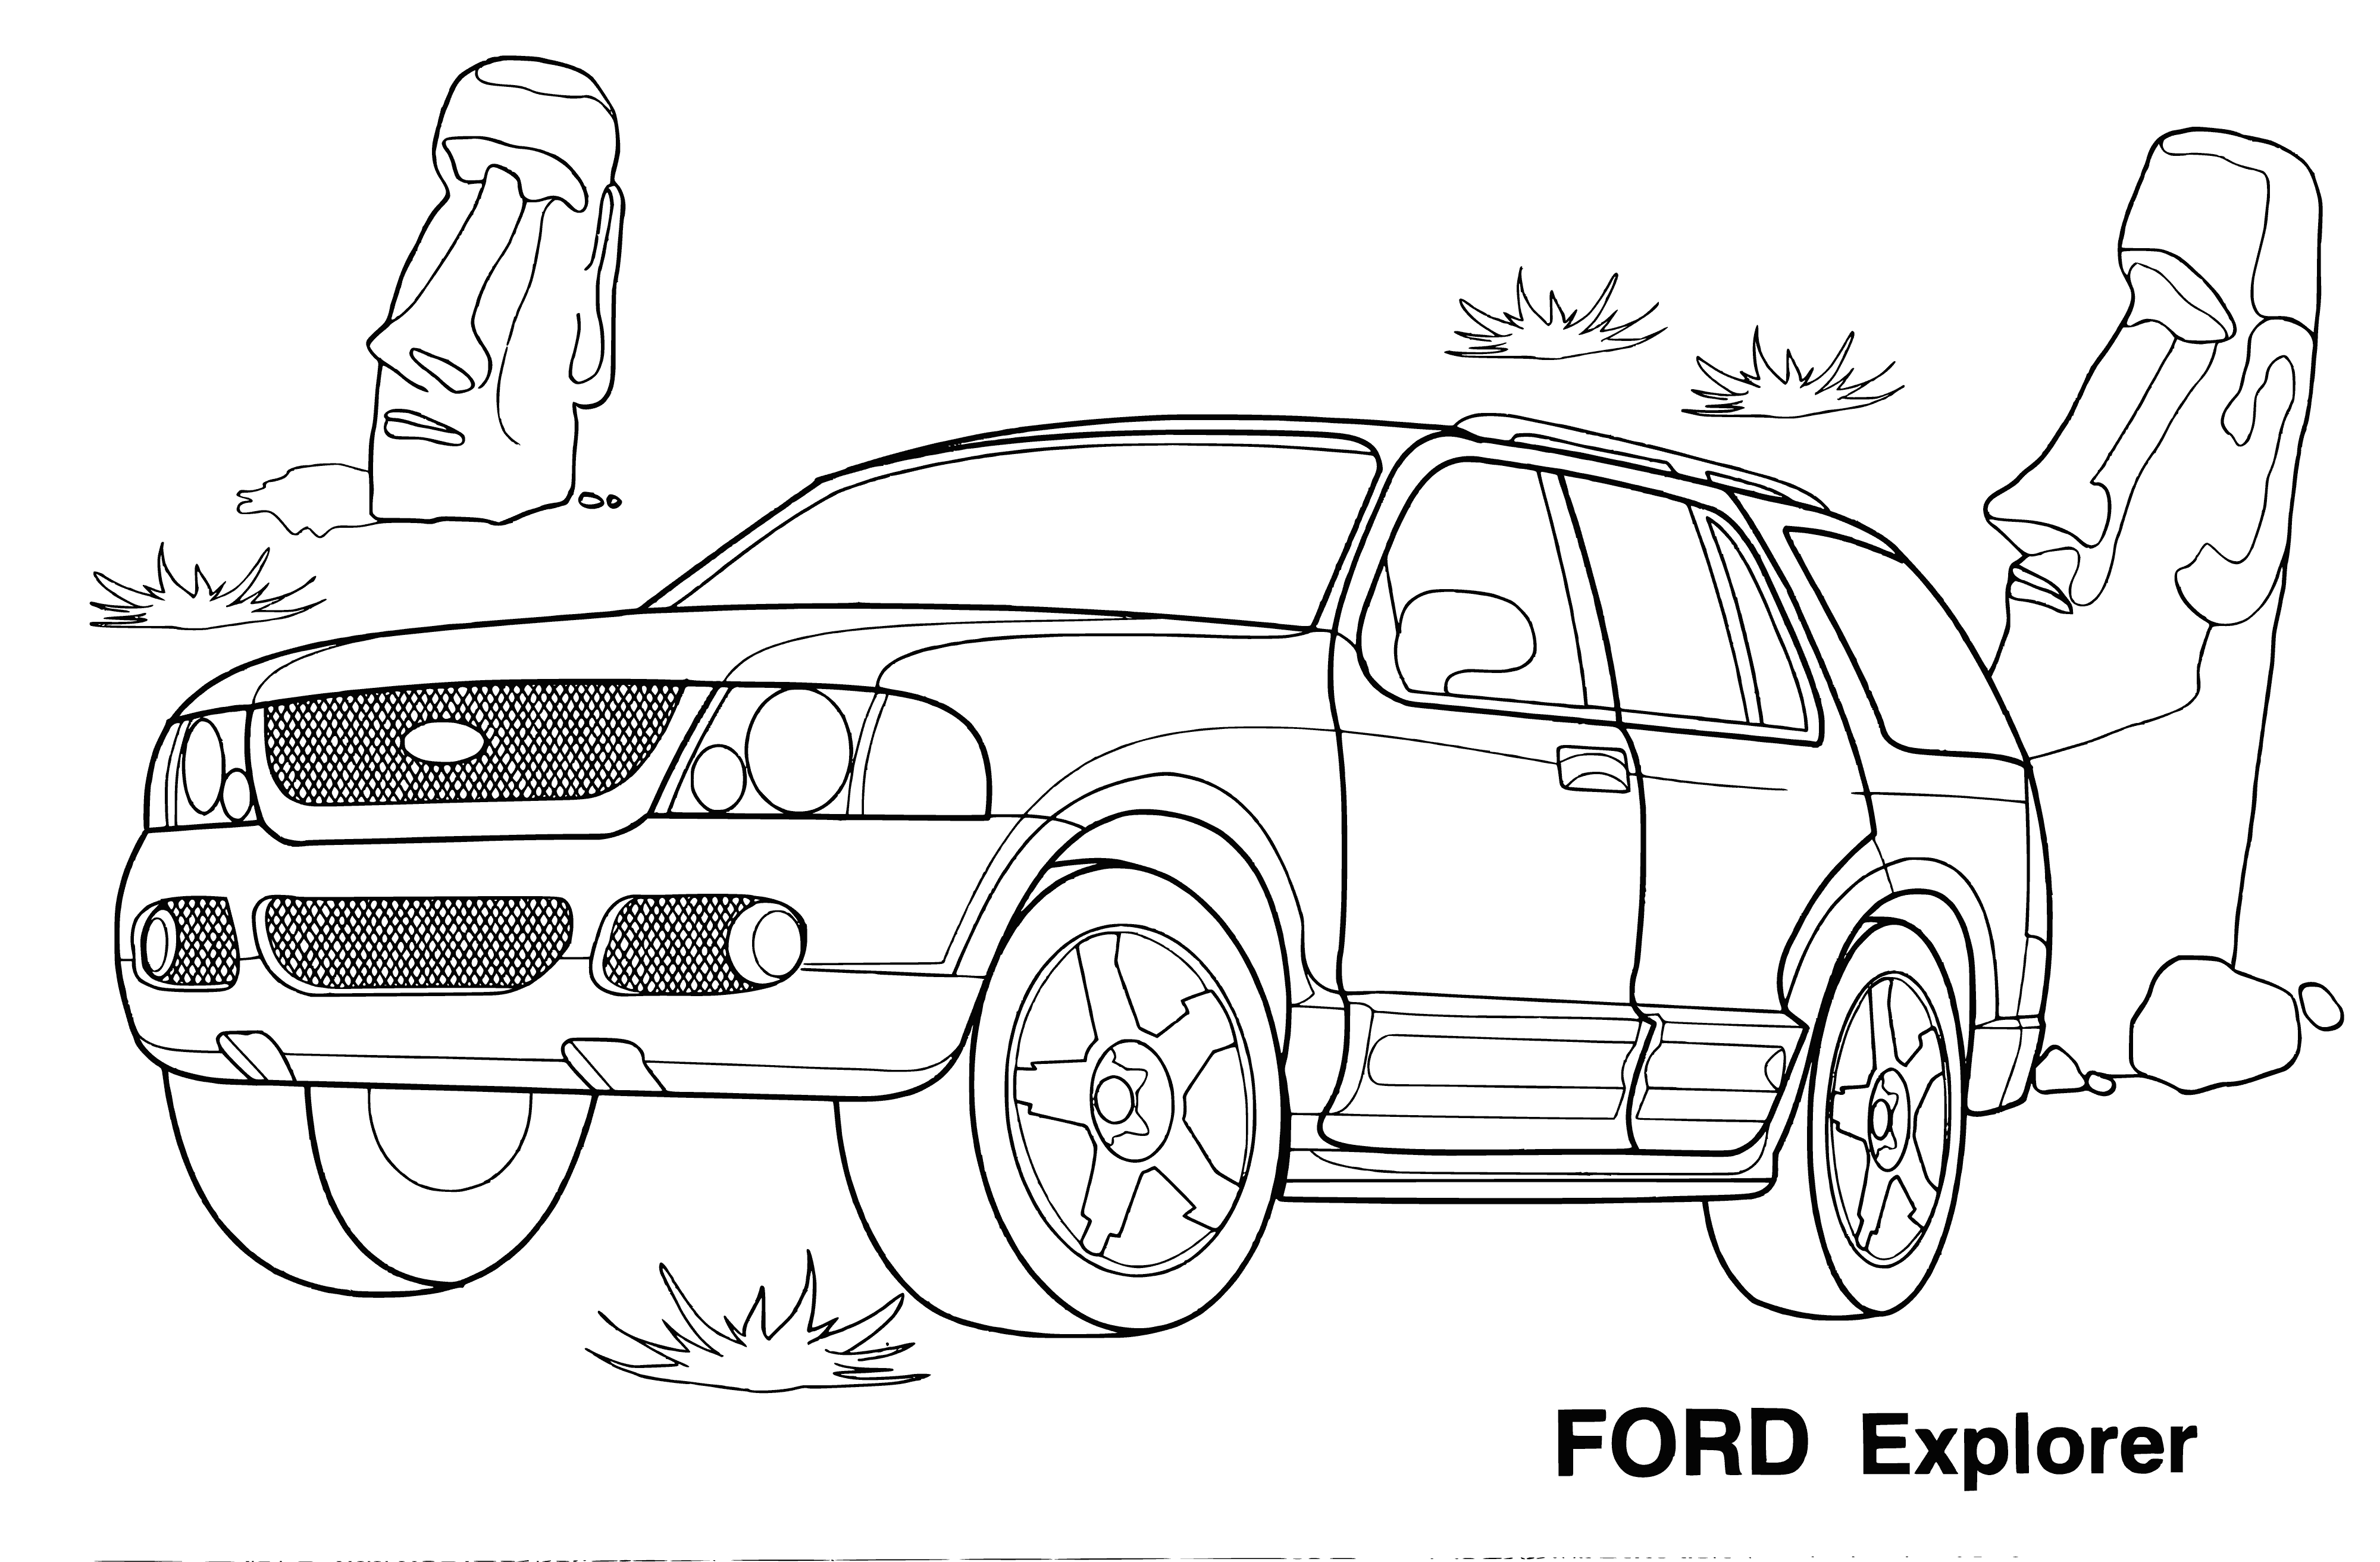 coloring page: Ford w/ long body & sloped front. Wide grille, vertical slats, integrated headlights, rectangular fog lights, raised body, & beefy tires w/ black rims & step-bars.